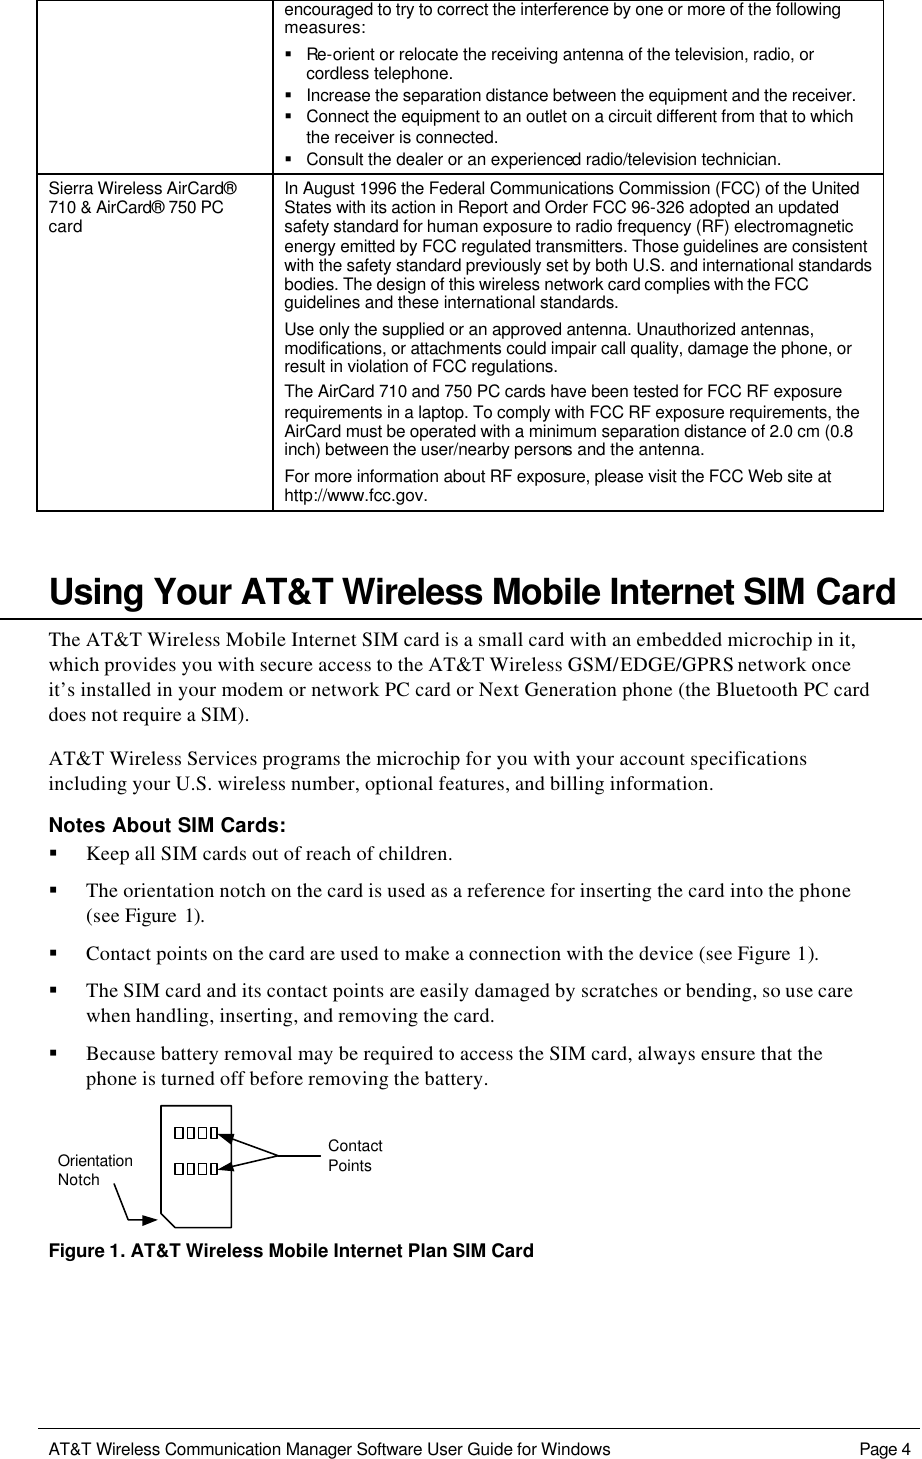   AT&amp;T Wireless Communication Manager Software User Guide for Windows    Page 4  encouraged to try to correct the interference by one or more of the following measures: § Re-orient or relocate the receiving antenna of the television, radio, or cordless telephone. § Increase the separation distance between the equipment and the receiver. § Connect the equipment to an outlet on a circuit different from that to which the receiver is connected. § Consult the dealer or an experienced radio/television technician. Sierra Wireless AirCard® 710 &amp; AirCard® 750 PC card In August 1996 the Federal Communications Commission (FCC) of the United States with its action in Report and Order FCC 96-326 adopted an updated safety standard for human exposure to radio frequency (RF) electromagnetic energy emitted by FCC regulated transmitters. Those guidelines are consistent with the safety standard previously set by both U.S. and international standards bodies. The design of this wireless network card complies with the FCC guidelines and these international standards. Use only the supplied or an approved antenna. Unauthorized antennas, modifications, or attachments could impair call quality, damage the phone, or result in violation of FCC regulations. The AirCard 710 and 750 PC cards have been tested for FCC RF exposure requirements in a laptop. To comply with FCC RF exposure requirements, the AirCard must be operated with a minimum separation distance of 2.0 cm (0.8 inch) between the user/nearby persons and the antenna. For more information about RF exposure, please visit the FCC Web site at http://www.fcc.gov.     Using Your AT&amp;T Wireless Mobile Internet SIM Card The AT&amp;T Wireless Mobile Internet SIM card is a small card with an embedded microchip in it, which provides you with secure access to the AT&amp;T Wireless GSM/EDGE/GPRS network once it’s installed in your modem or network PC card or Next Generation phone (the Bluetooth PC card does not require a SIM). AT&amp;T Wireless Services programs the microchip for you with your account specifications including your U.S. wireless number, optional features, and billing information. Notes About SIM Cards: § Keep all SIM cards out of reach of children. § The orientation notch on the card is used as a reference for inserting the card into the phone (see Figure 1). § Contact points on the card are used to make a connection with the device (see Figure 1). § The SIM card and its contact points are easily damaged by scratches or bending, so use care when handling, inserting, and removing the card. § Because battery removal may be required to access the SIM card, always ensure that the phone is turned off before removing the battery. ContactPointsOrientationNotch Figure 1. AT&amp;T Wireless Mobile Internet Plan SIM Card 